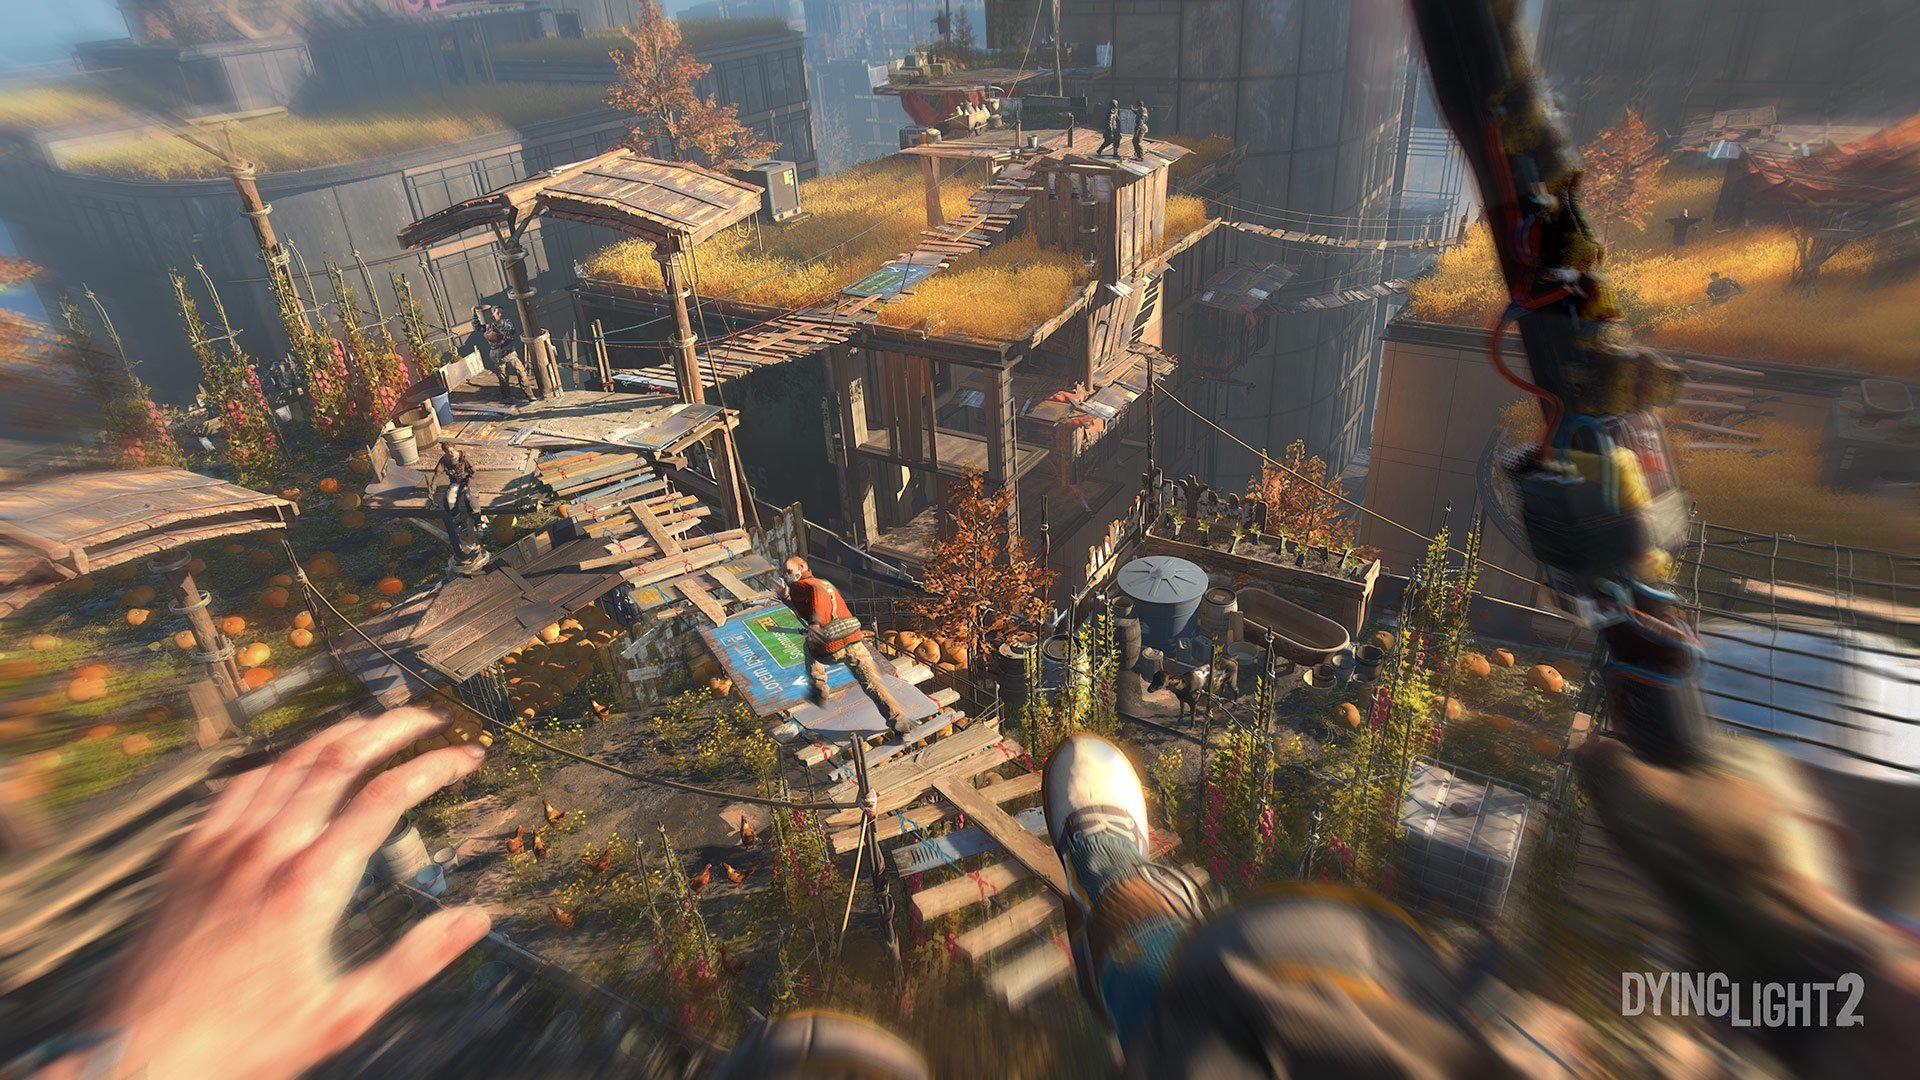 Dying Light 2 release delayed from |